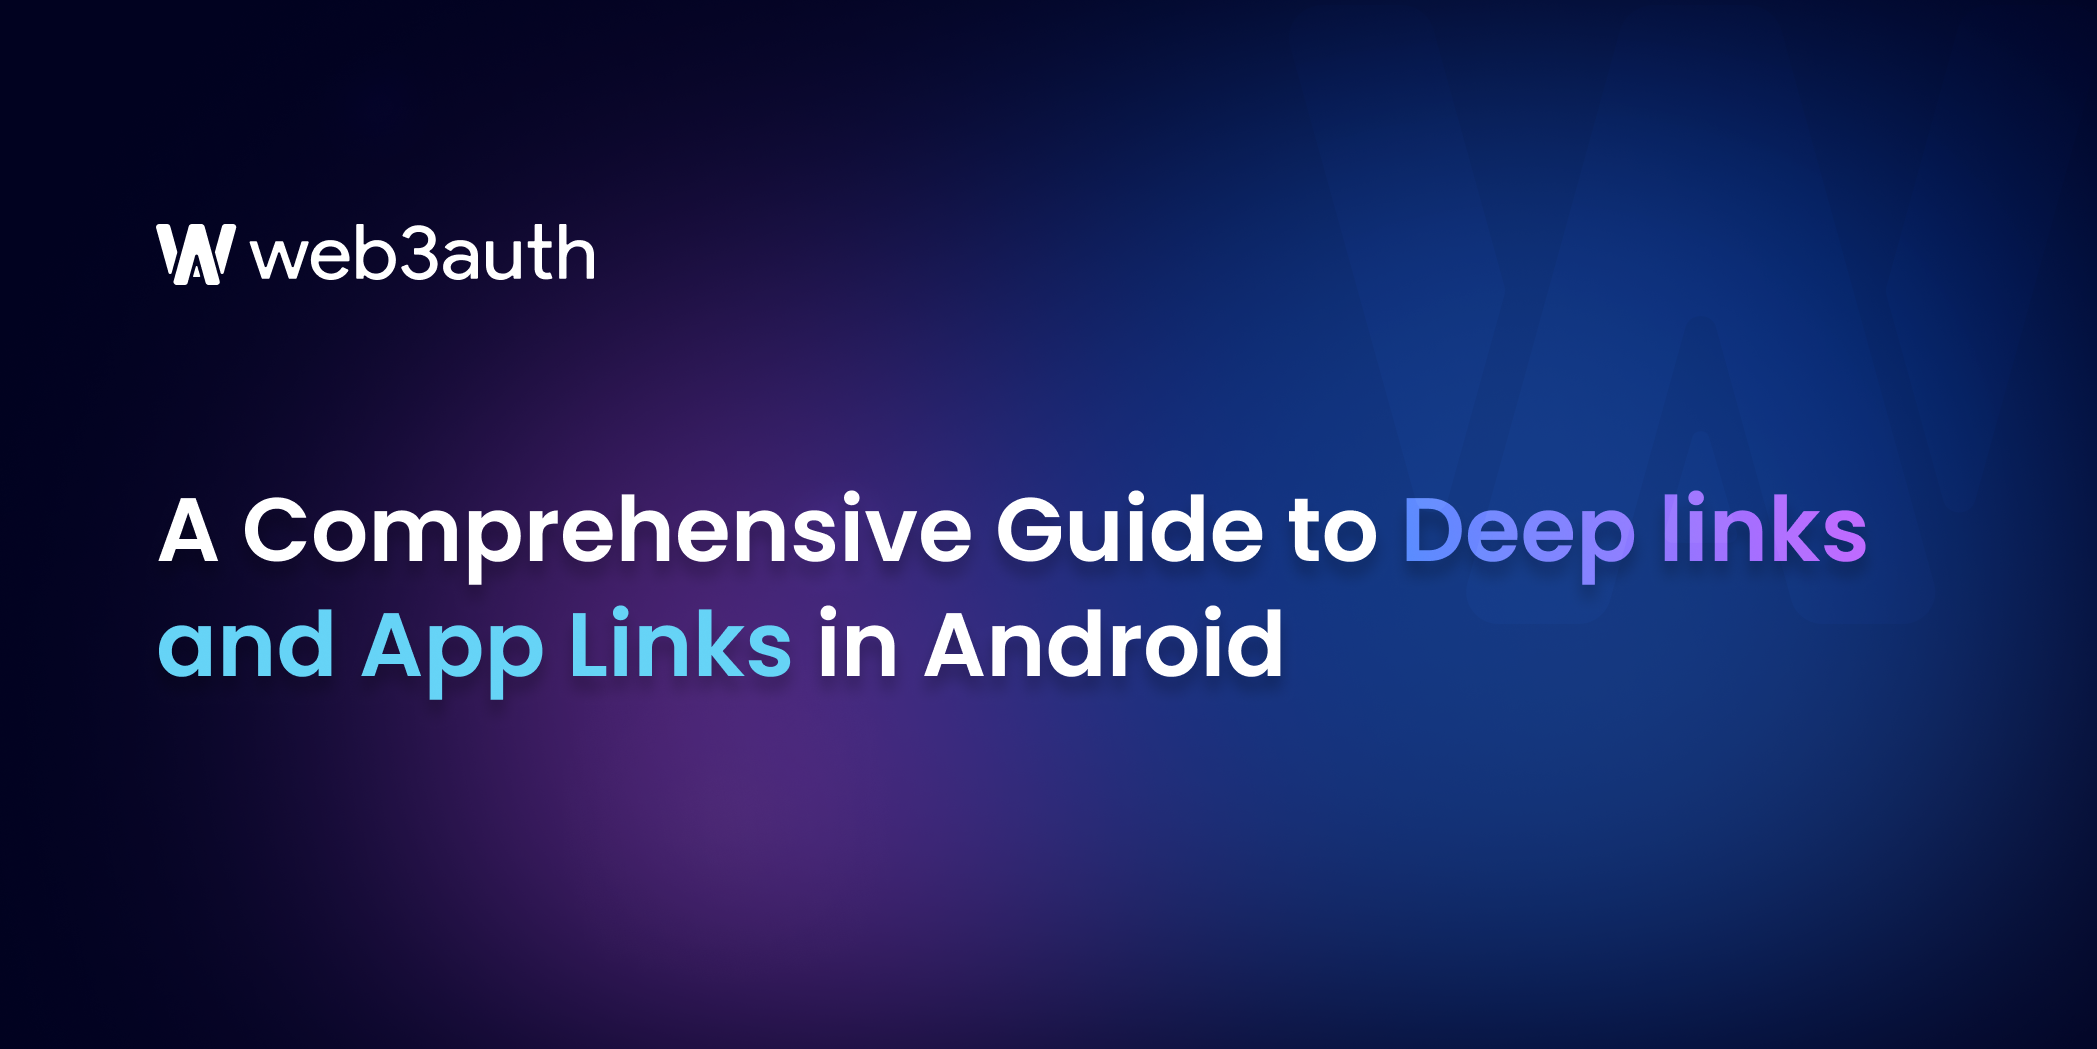 A Comprehensive Guide to Deep links and App Links in Android